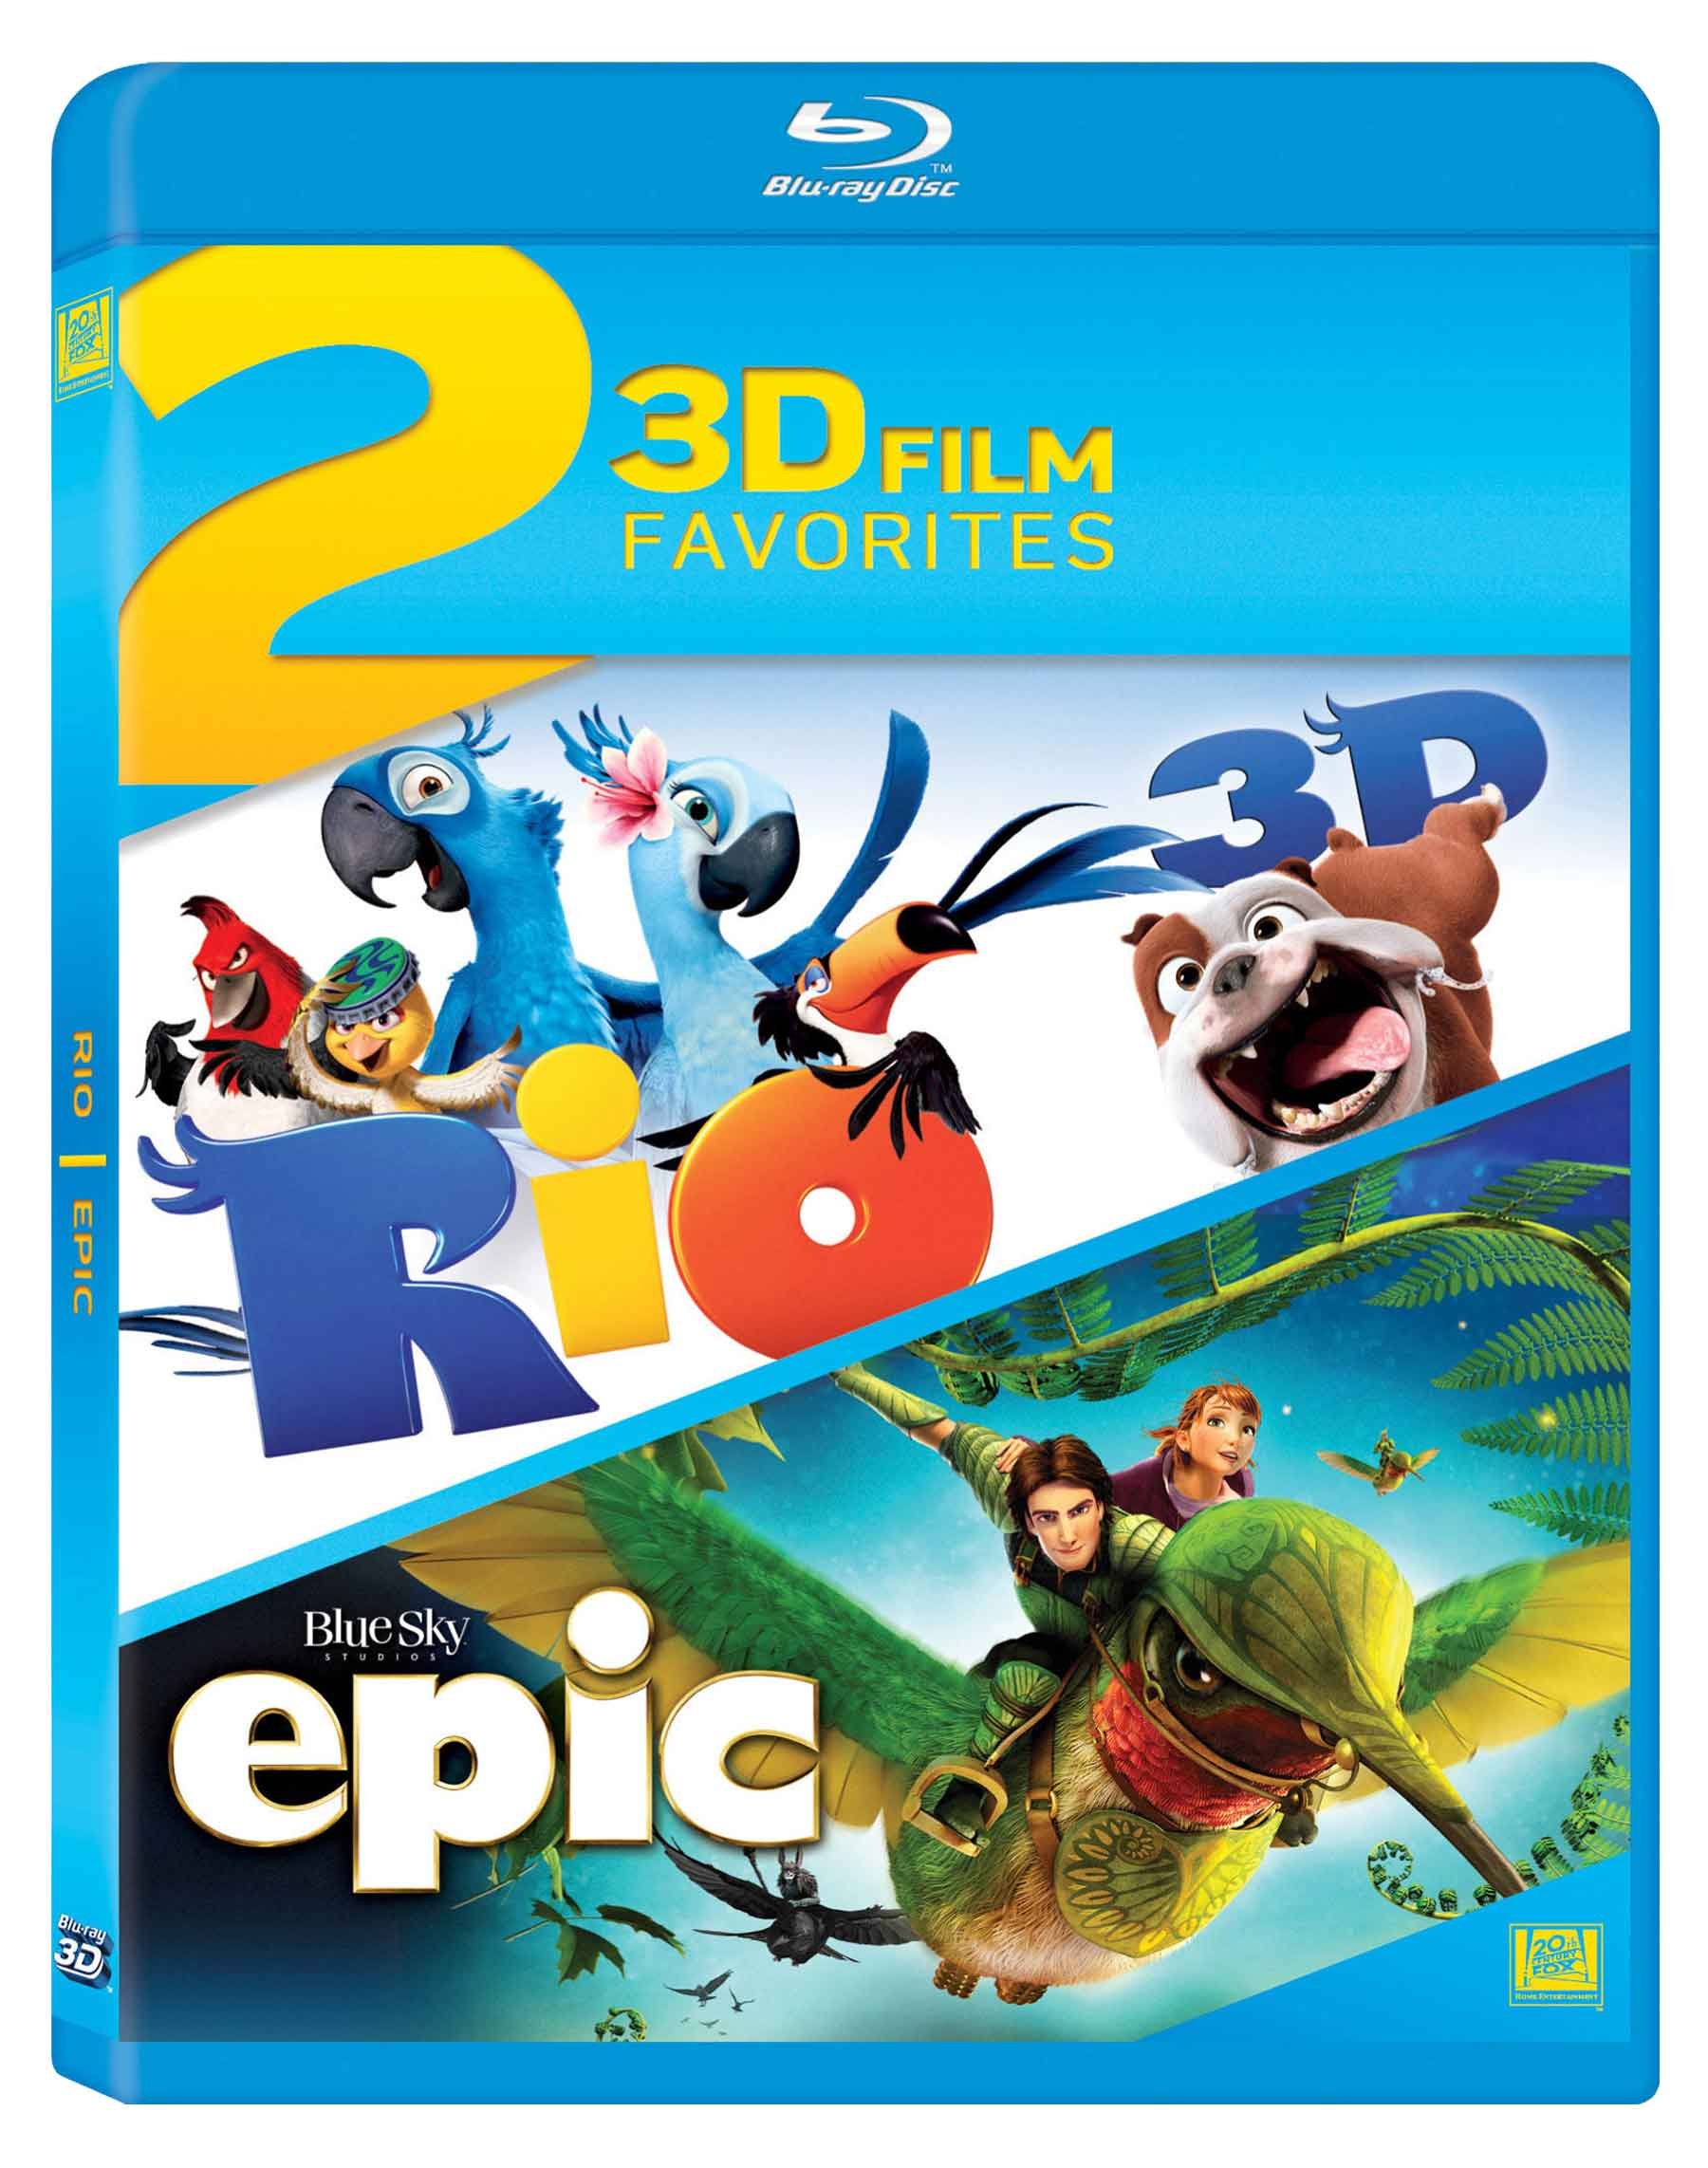 epic-rio-3d-blu-ray-movie-purchase-or-watch-online